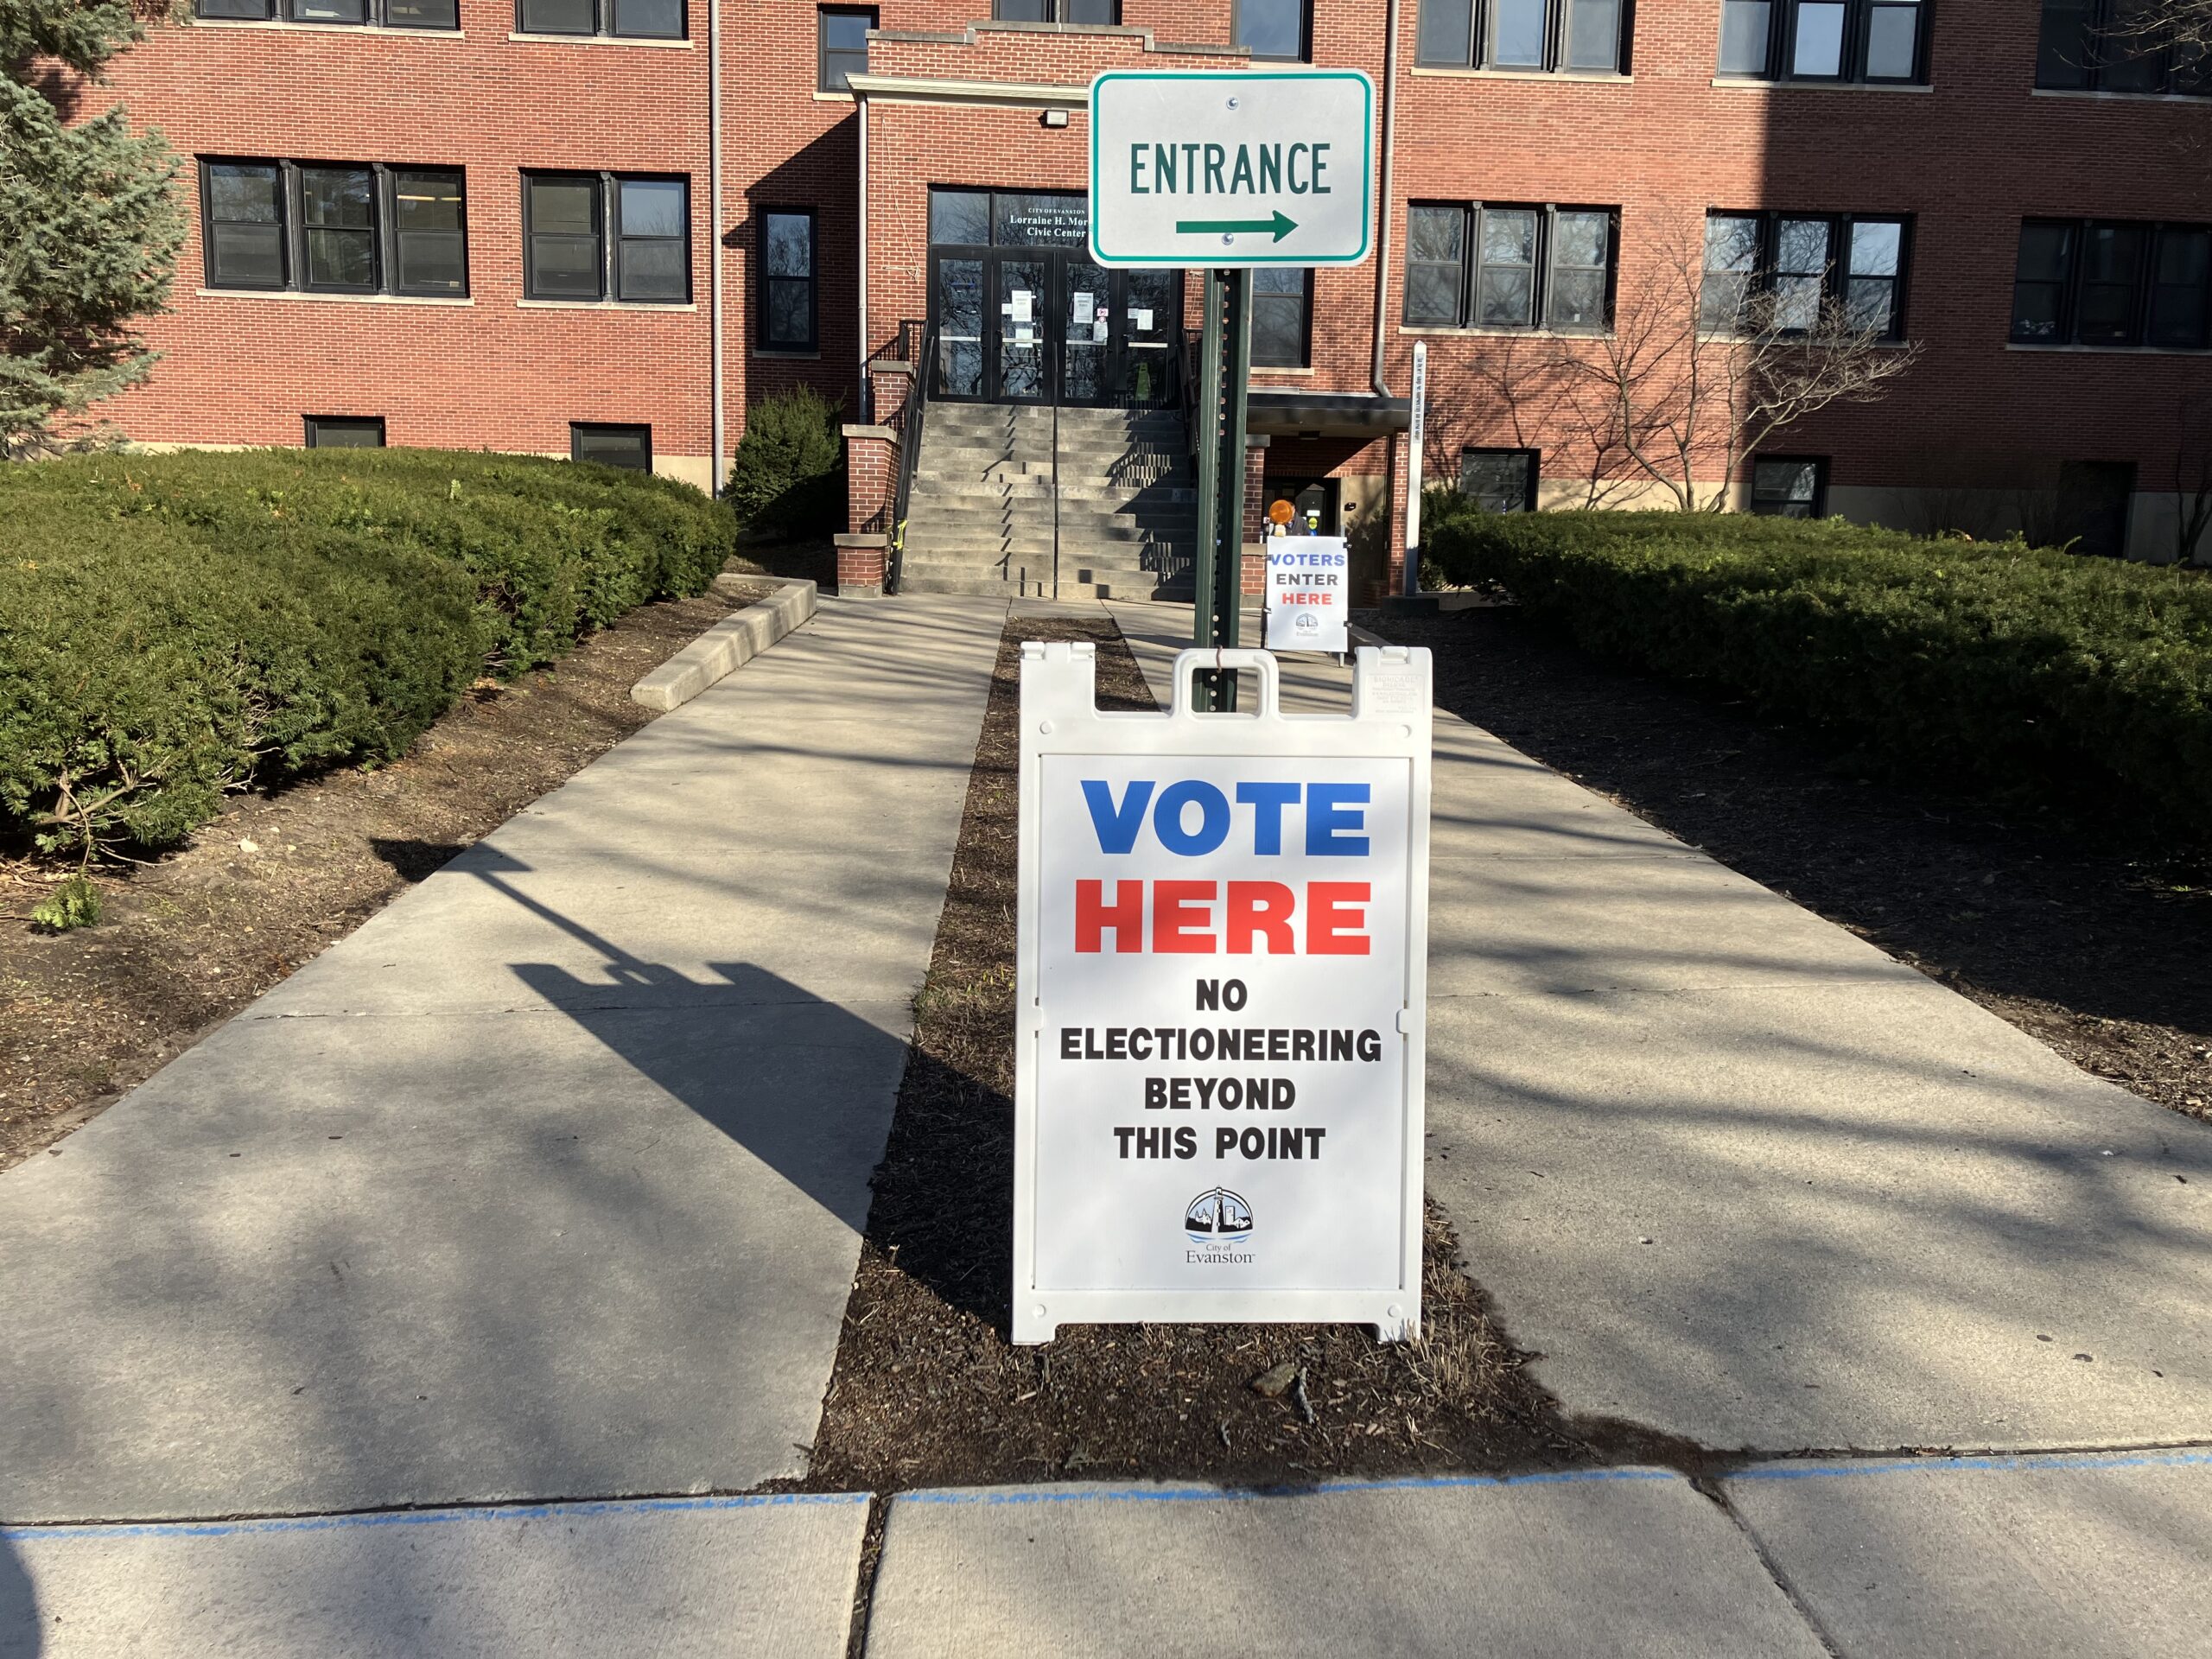 Evanston not ready to accept a no on Ranked-Choice voting system